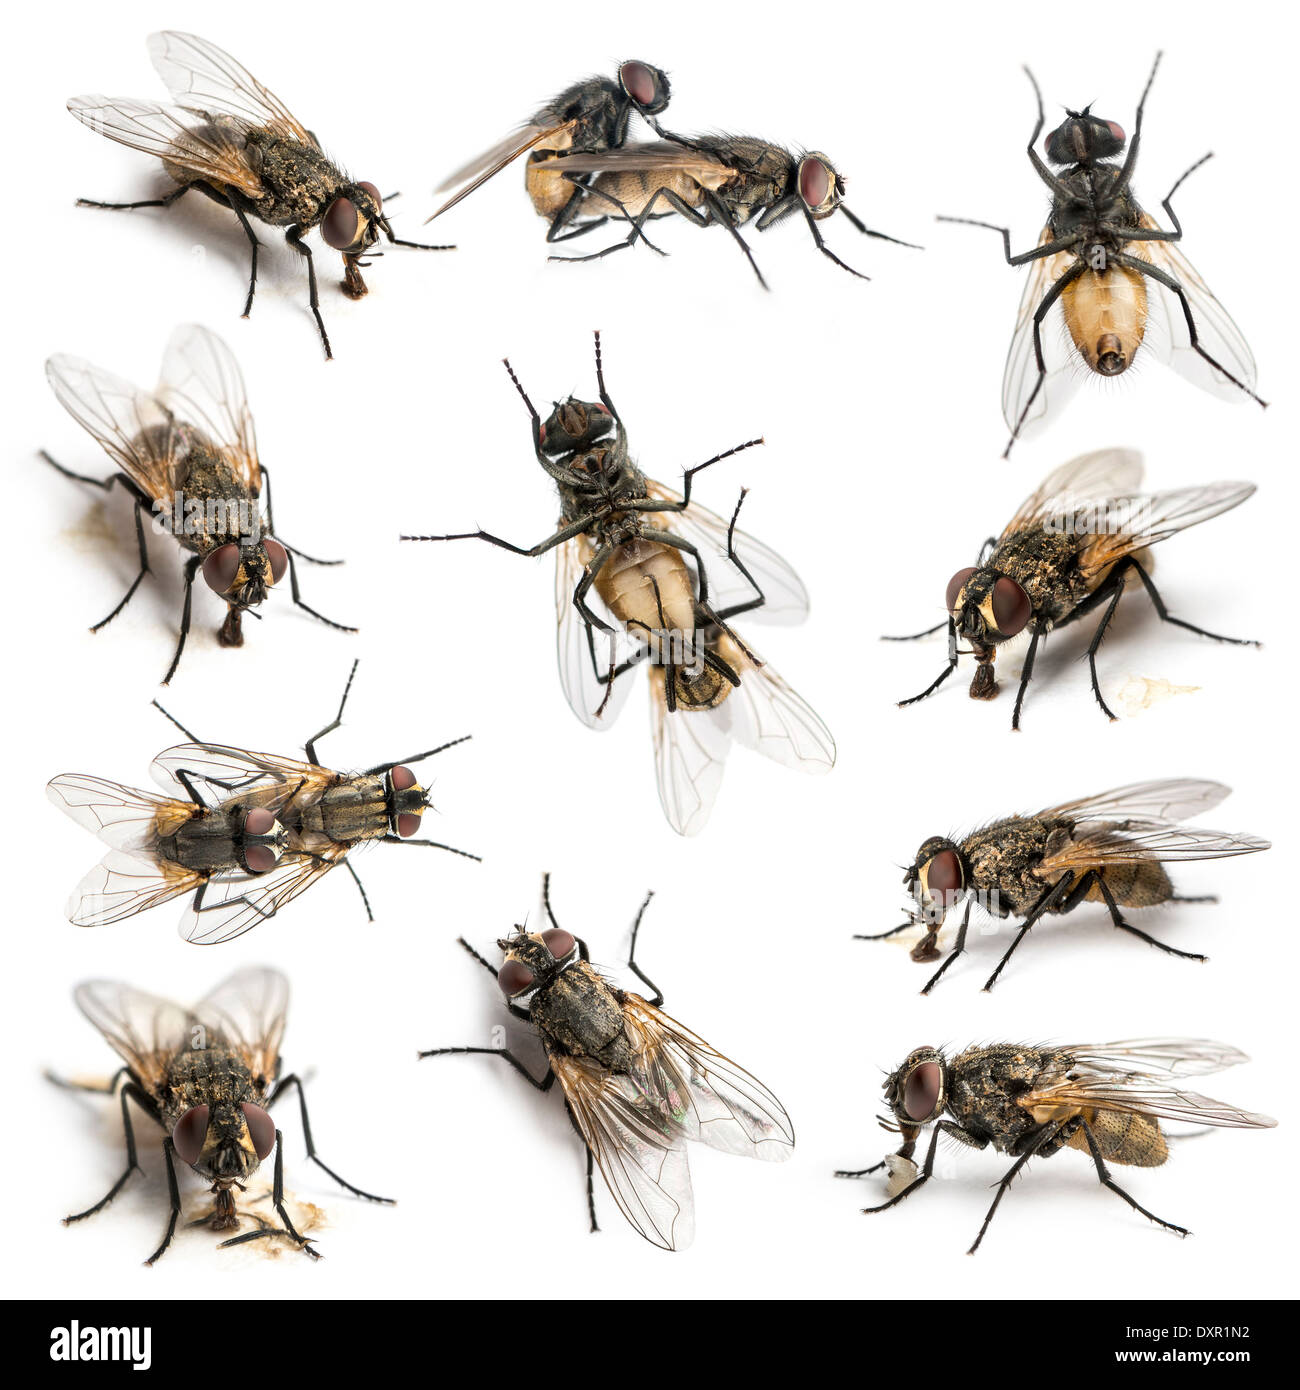 Housefly Insect Facts  Musca domestica - A-Z Animals